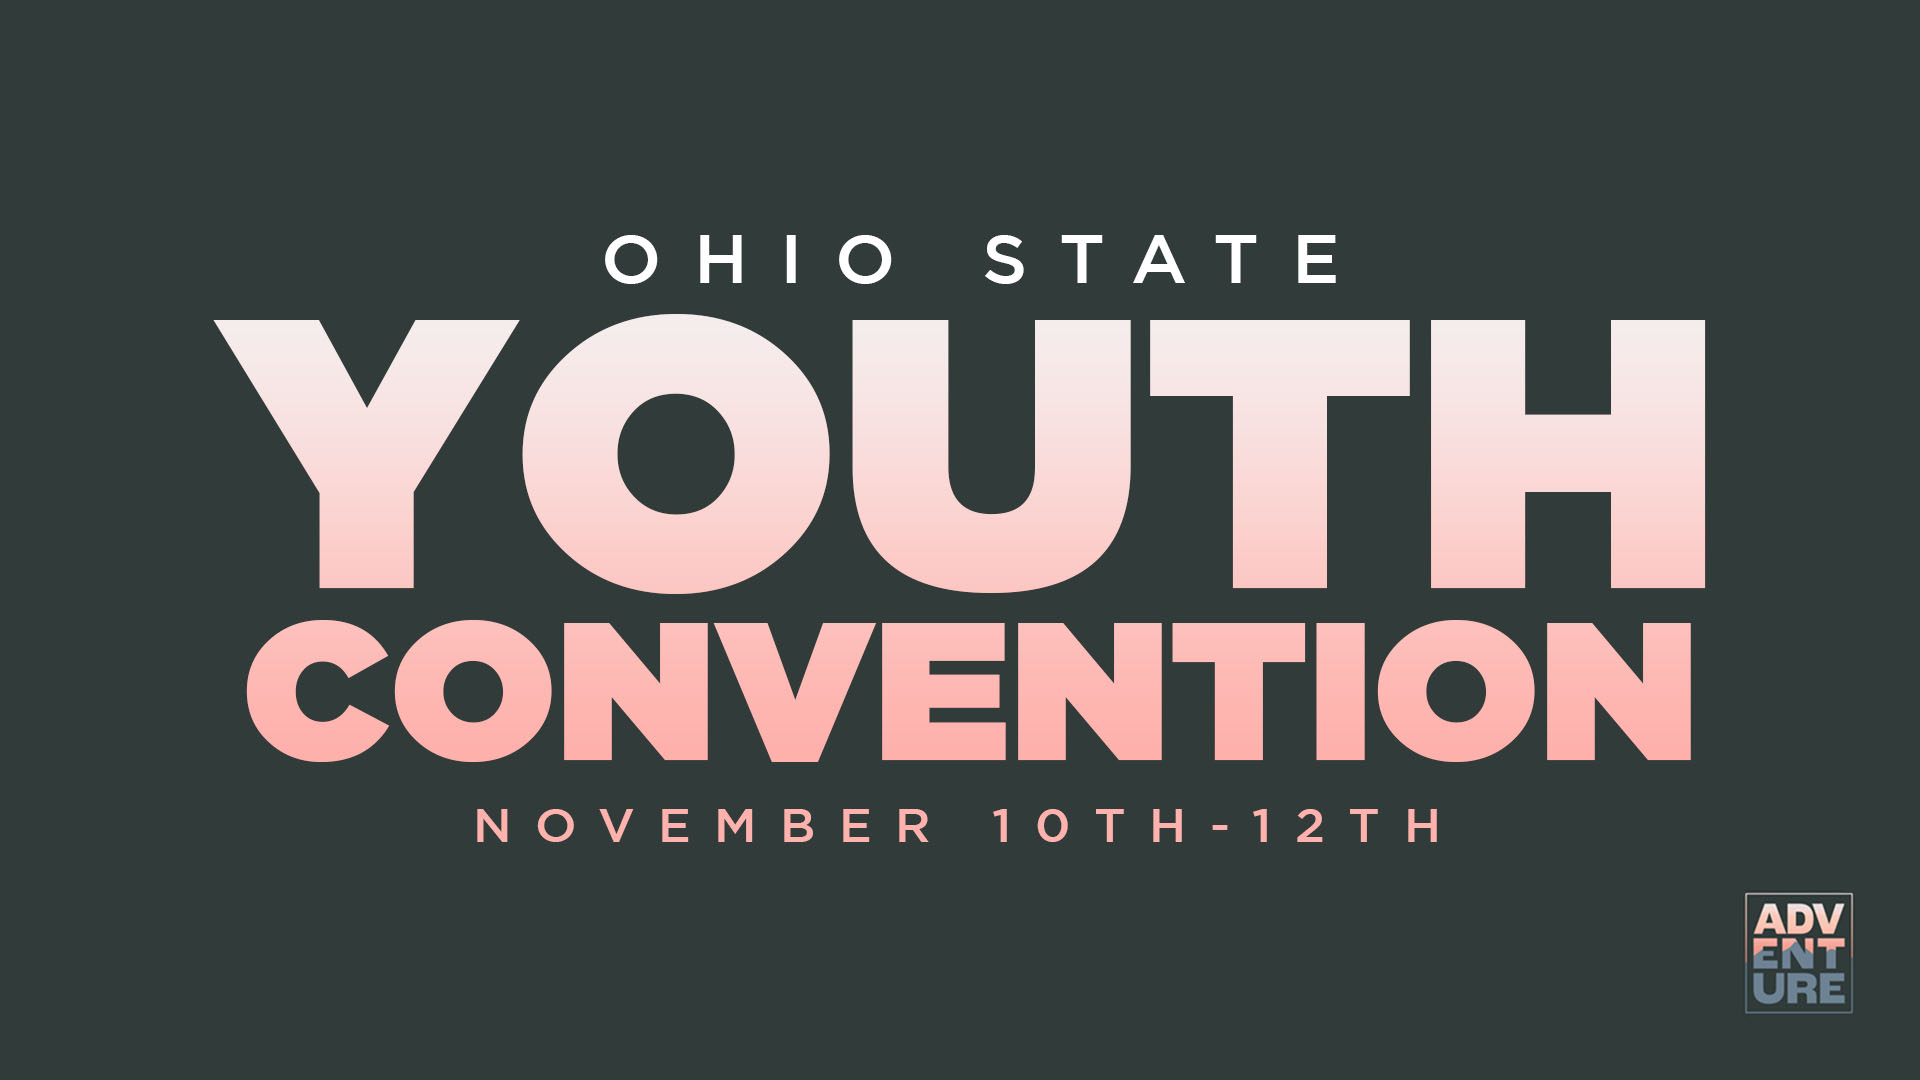 Featured image for “Ohio State Youth Convention”